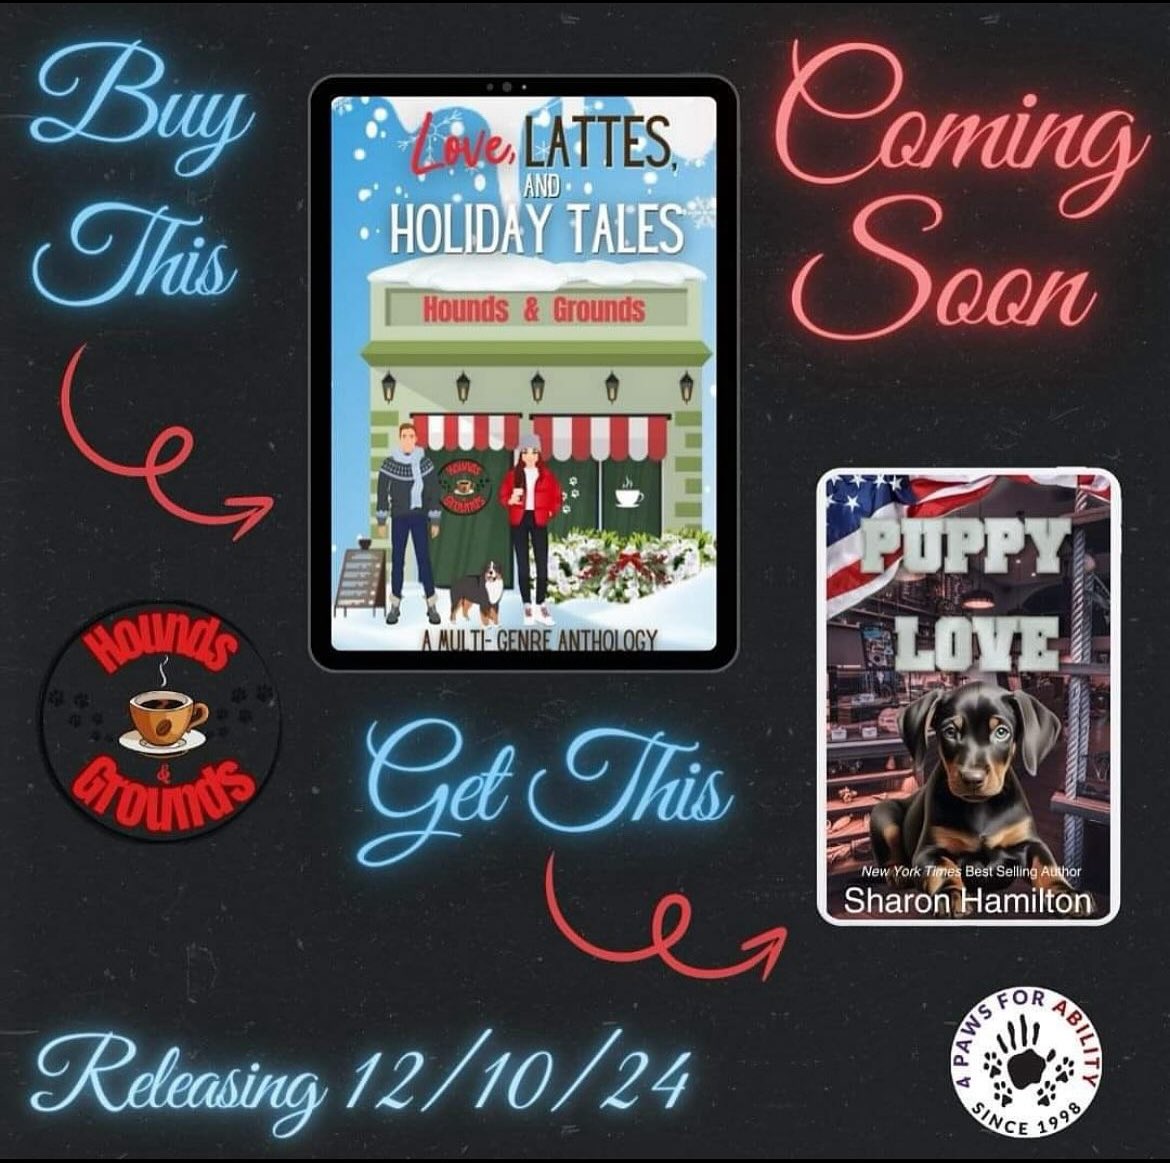 Wednesday, Coffee, & Books presents: Love, Lattes, & Holiday Tales a collection of brand new unique short stories for the festive season. Buylink: books2read.com/llht24 #99cents #SweettoSteamy #steamyreads #anthologyforacause #steamybookrec